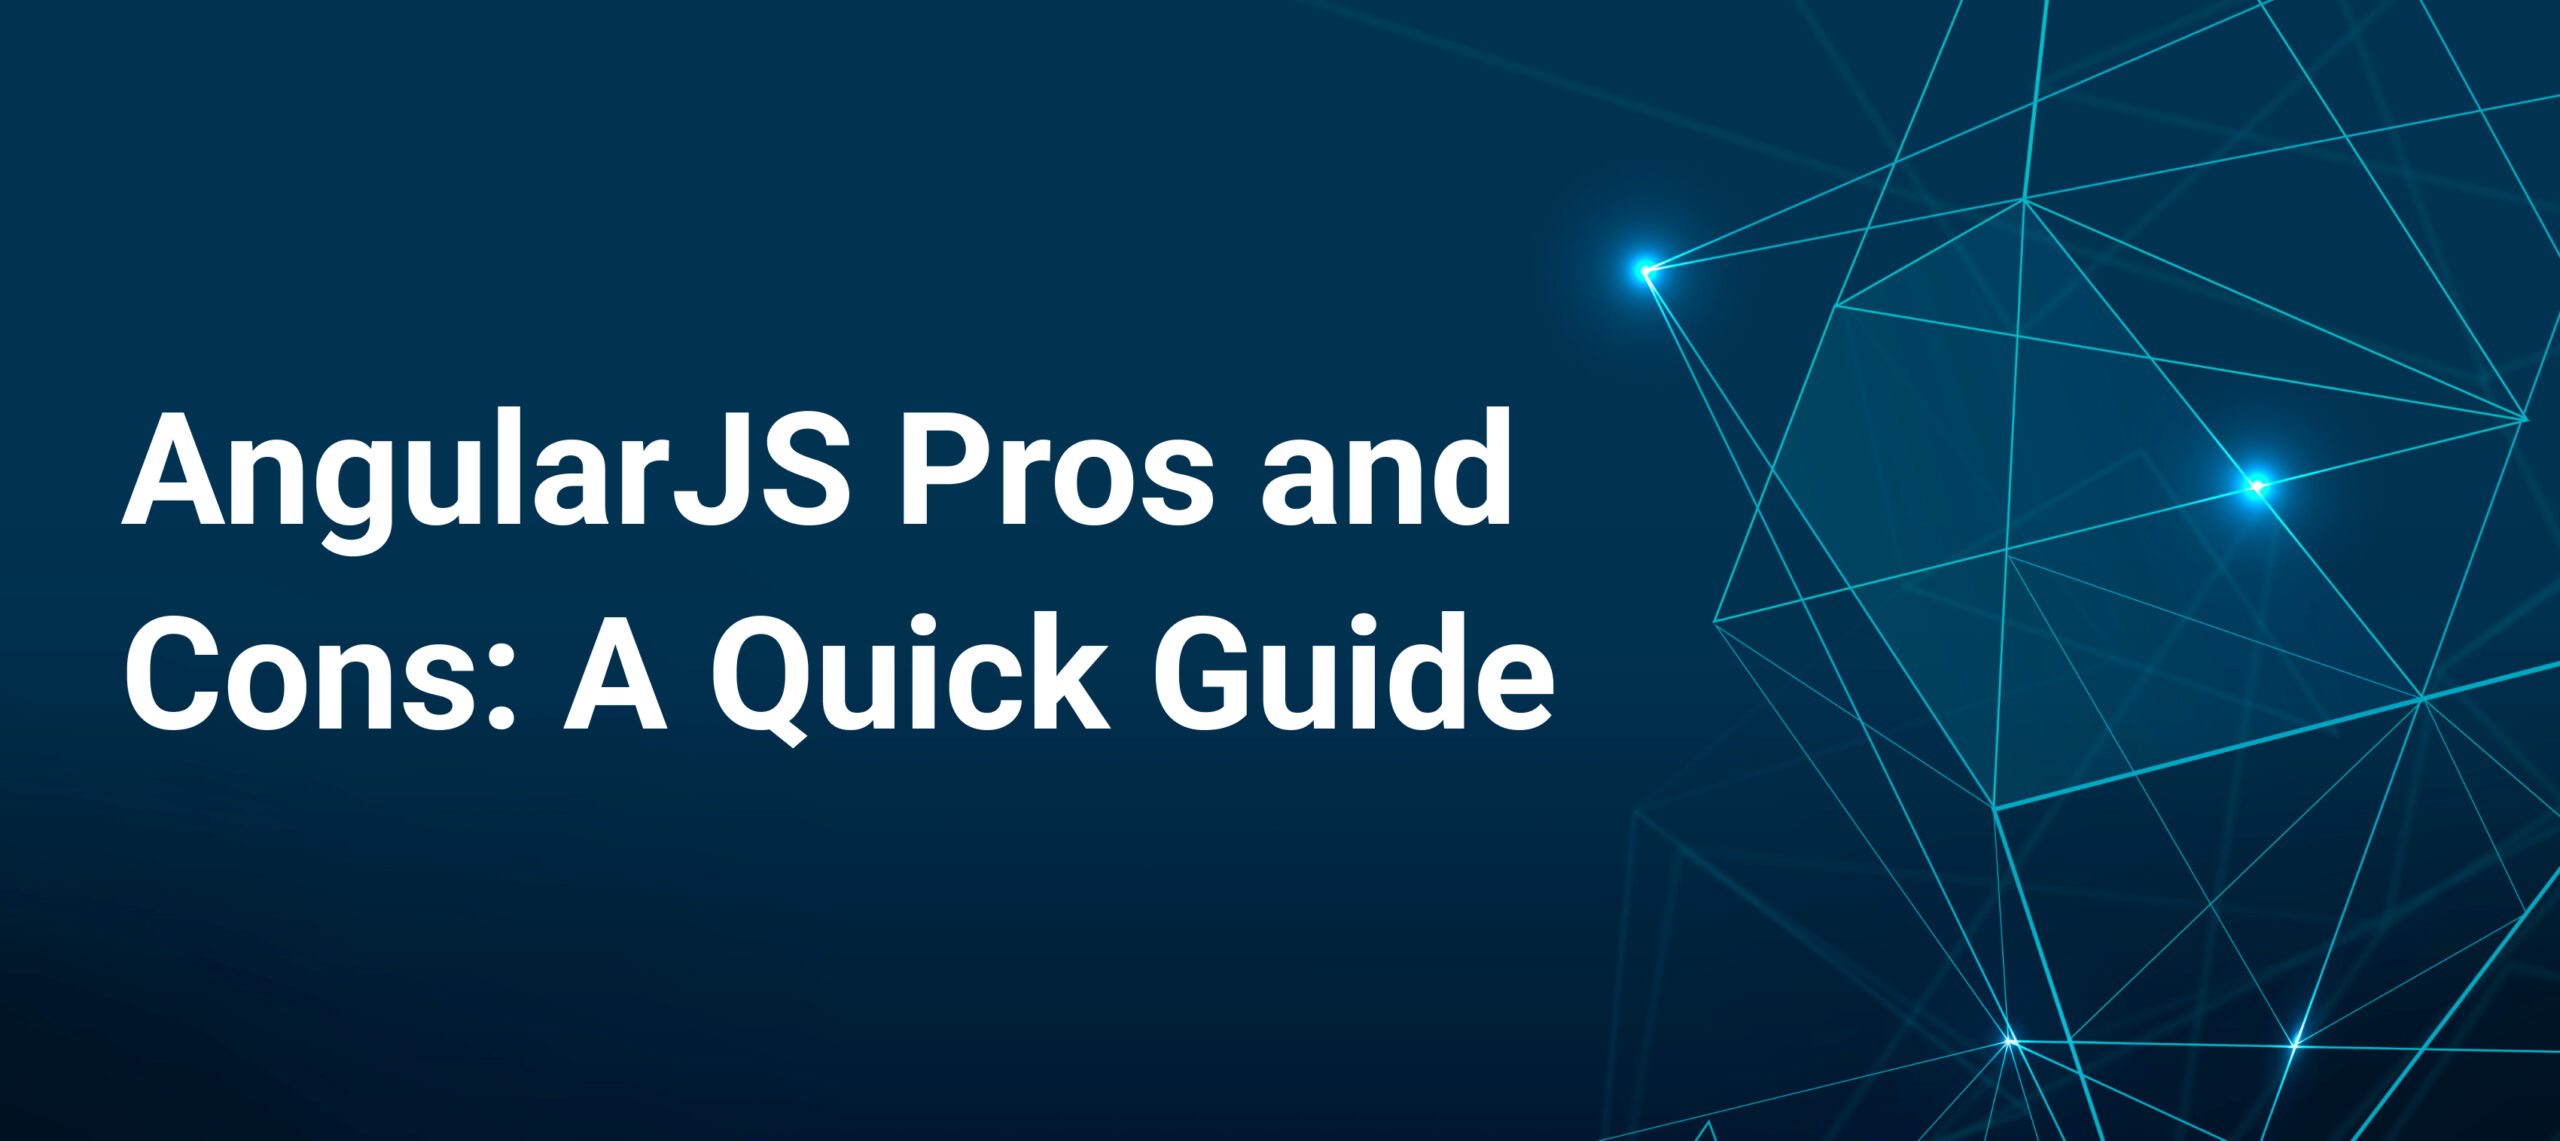  AngularJS Pros and Cons: A Quick Guide